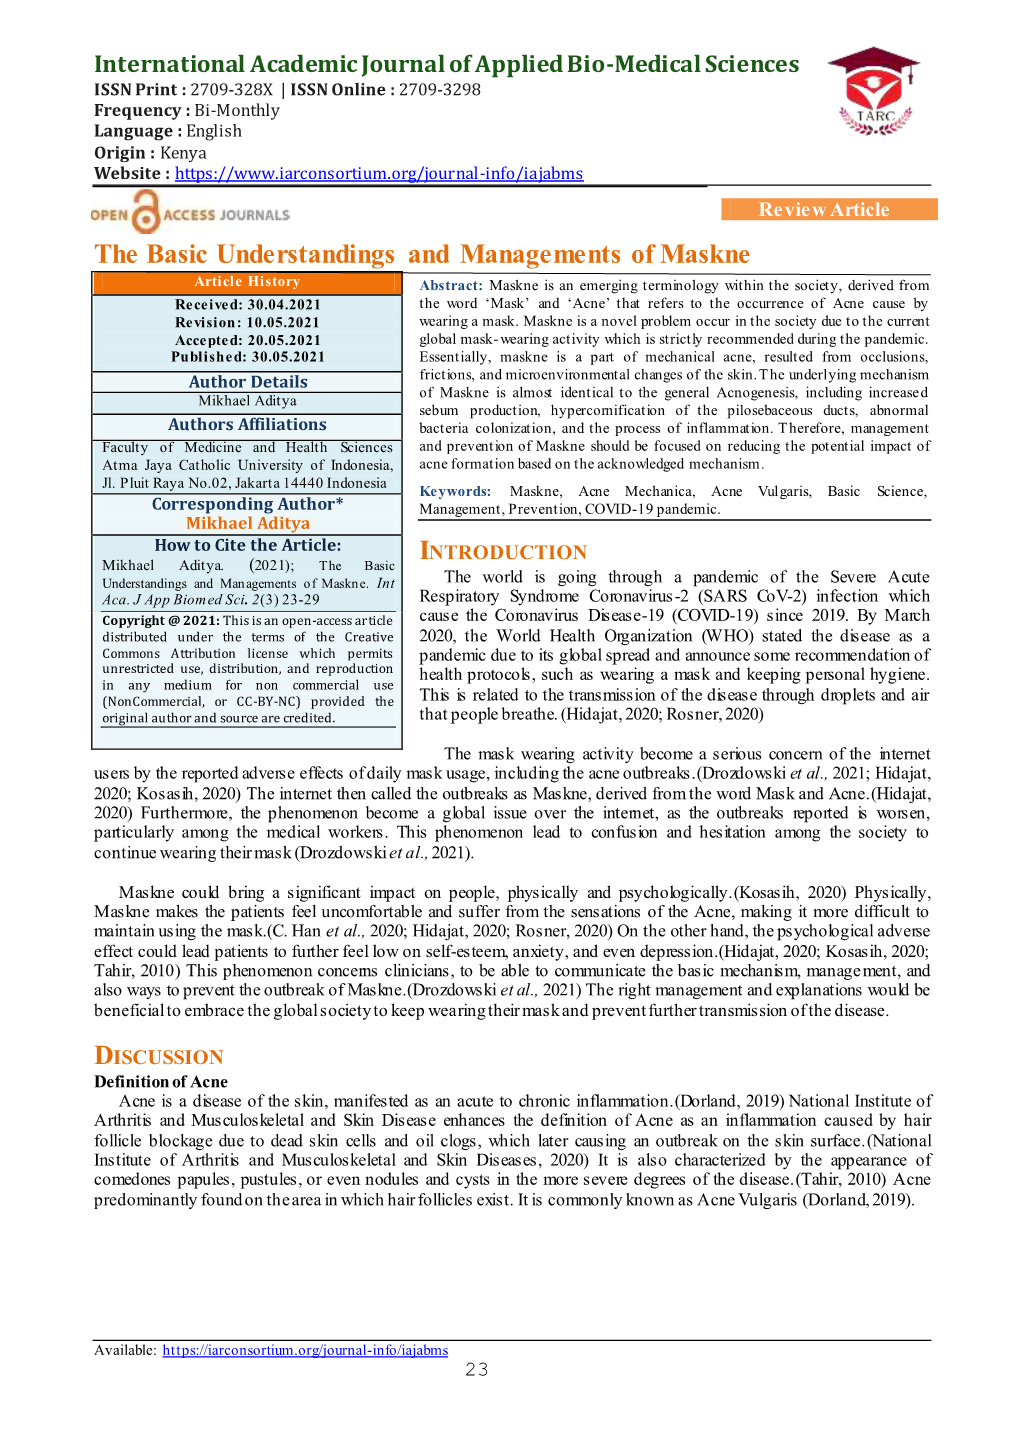 The Basic Understandings and Managements of Maskne